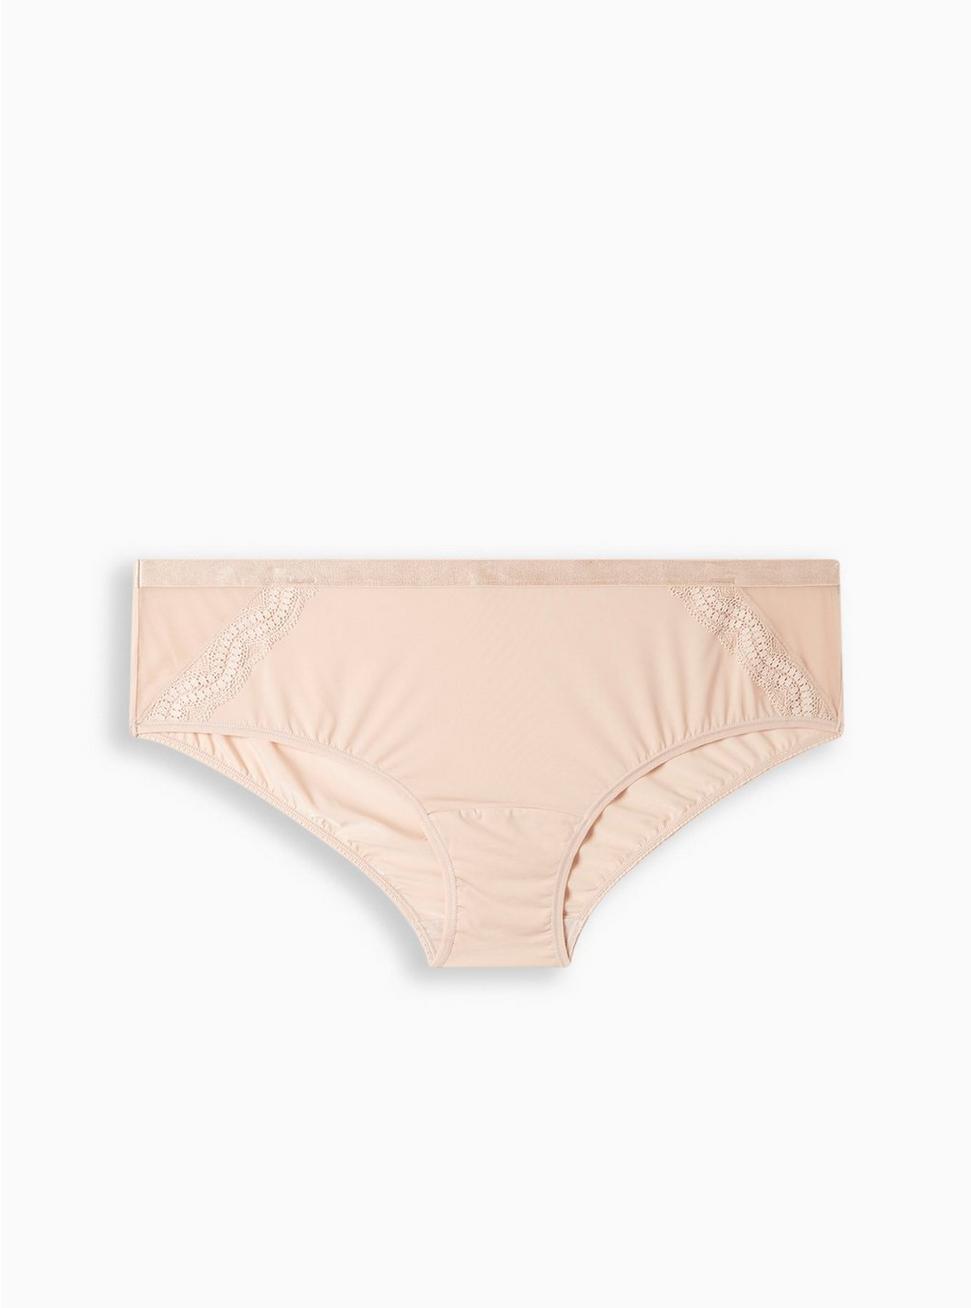 Second Skin Mid-Rise Hipster Panty, ROSE DUST PINK, hi-res